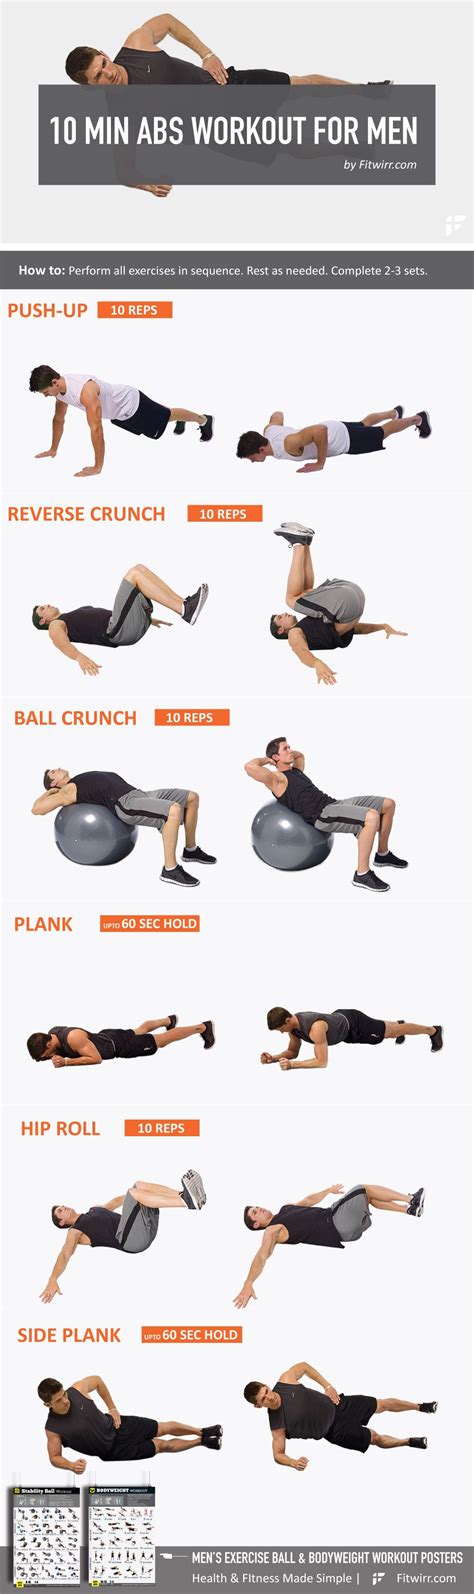 Best Ab Workouts For Men Ab Exercises For Six Pack Abs Minute Ab Workout Ab Workout